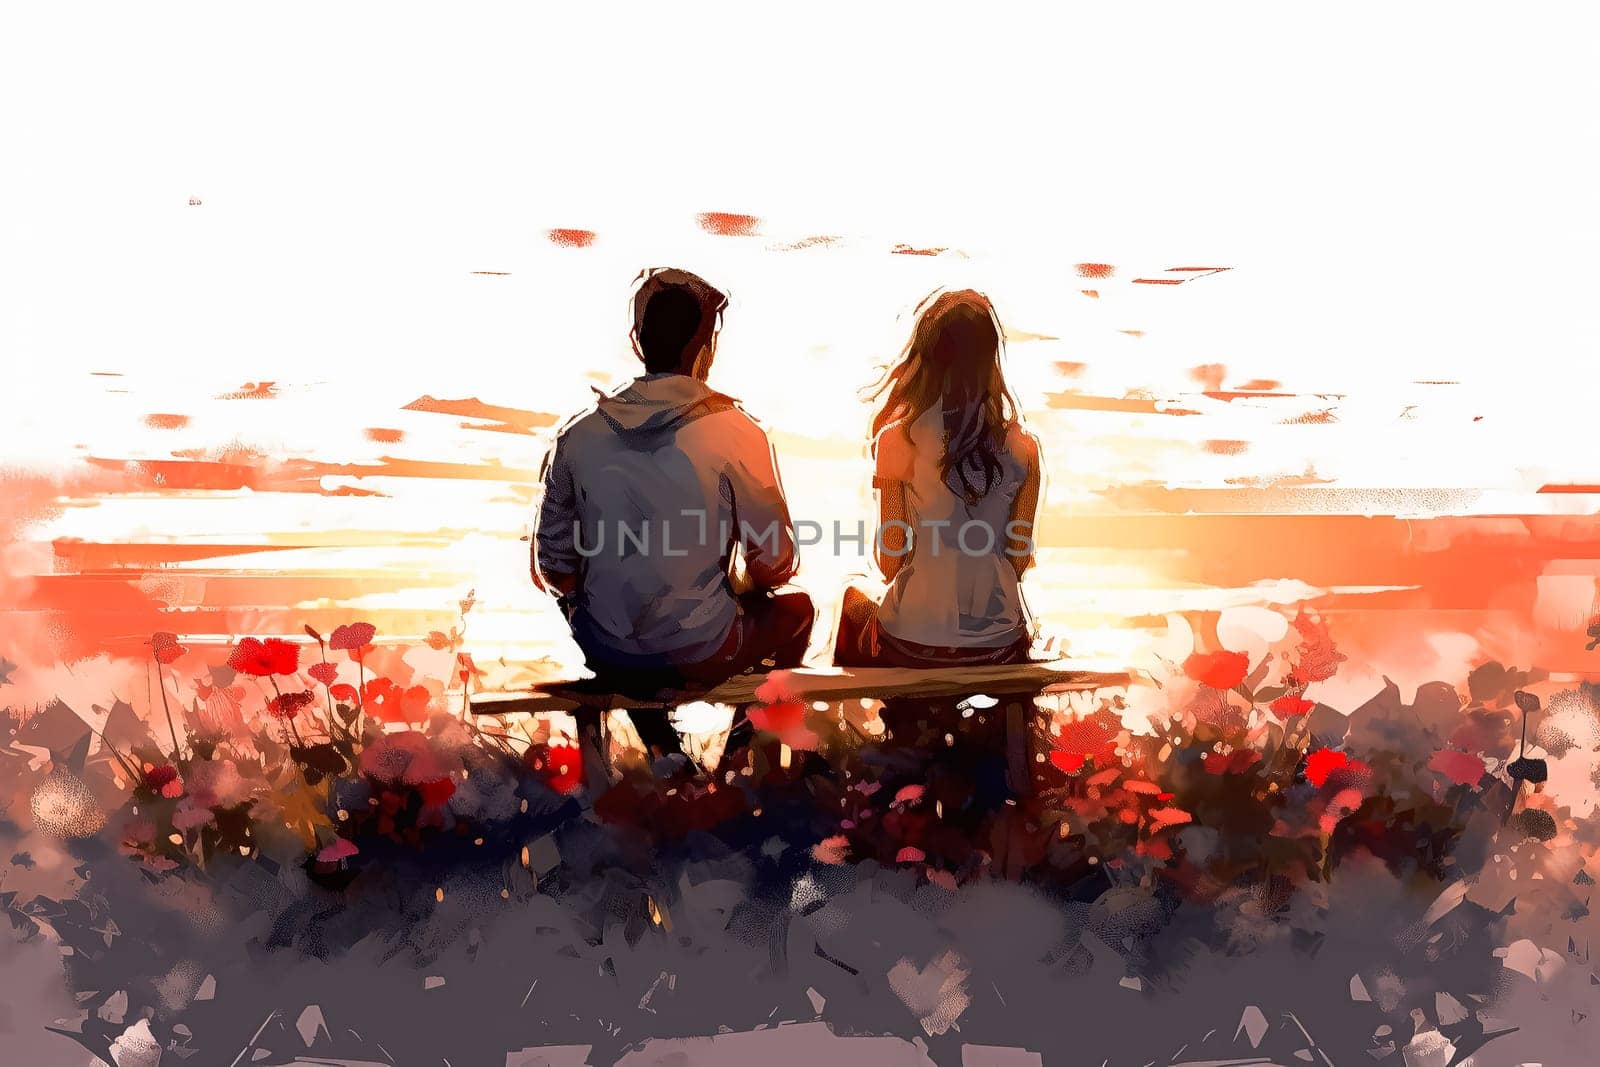 a watercolor illustration depicts a couple in a tender moment, gazing at the setting sun. by Alla_Morozova93